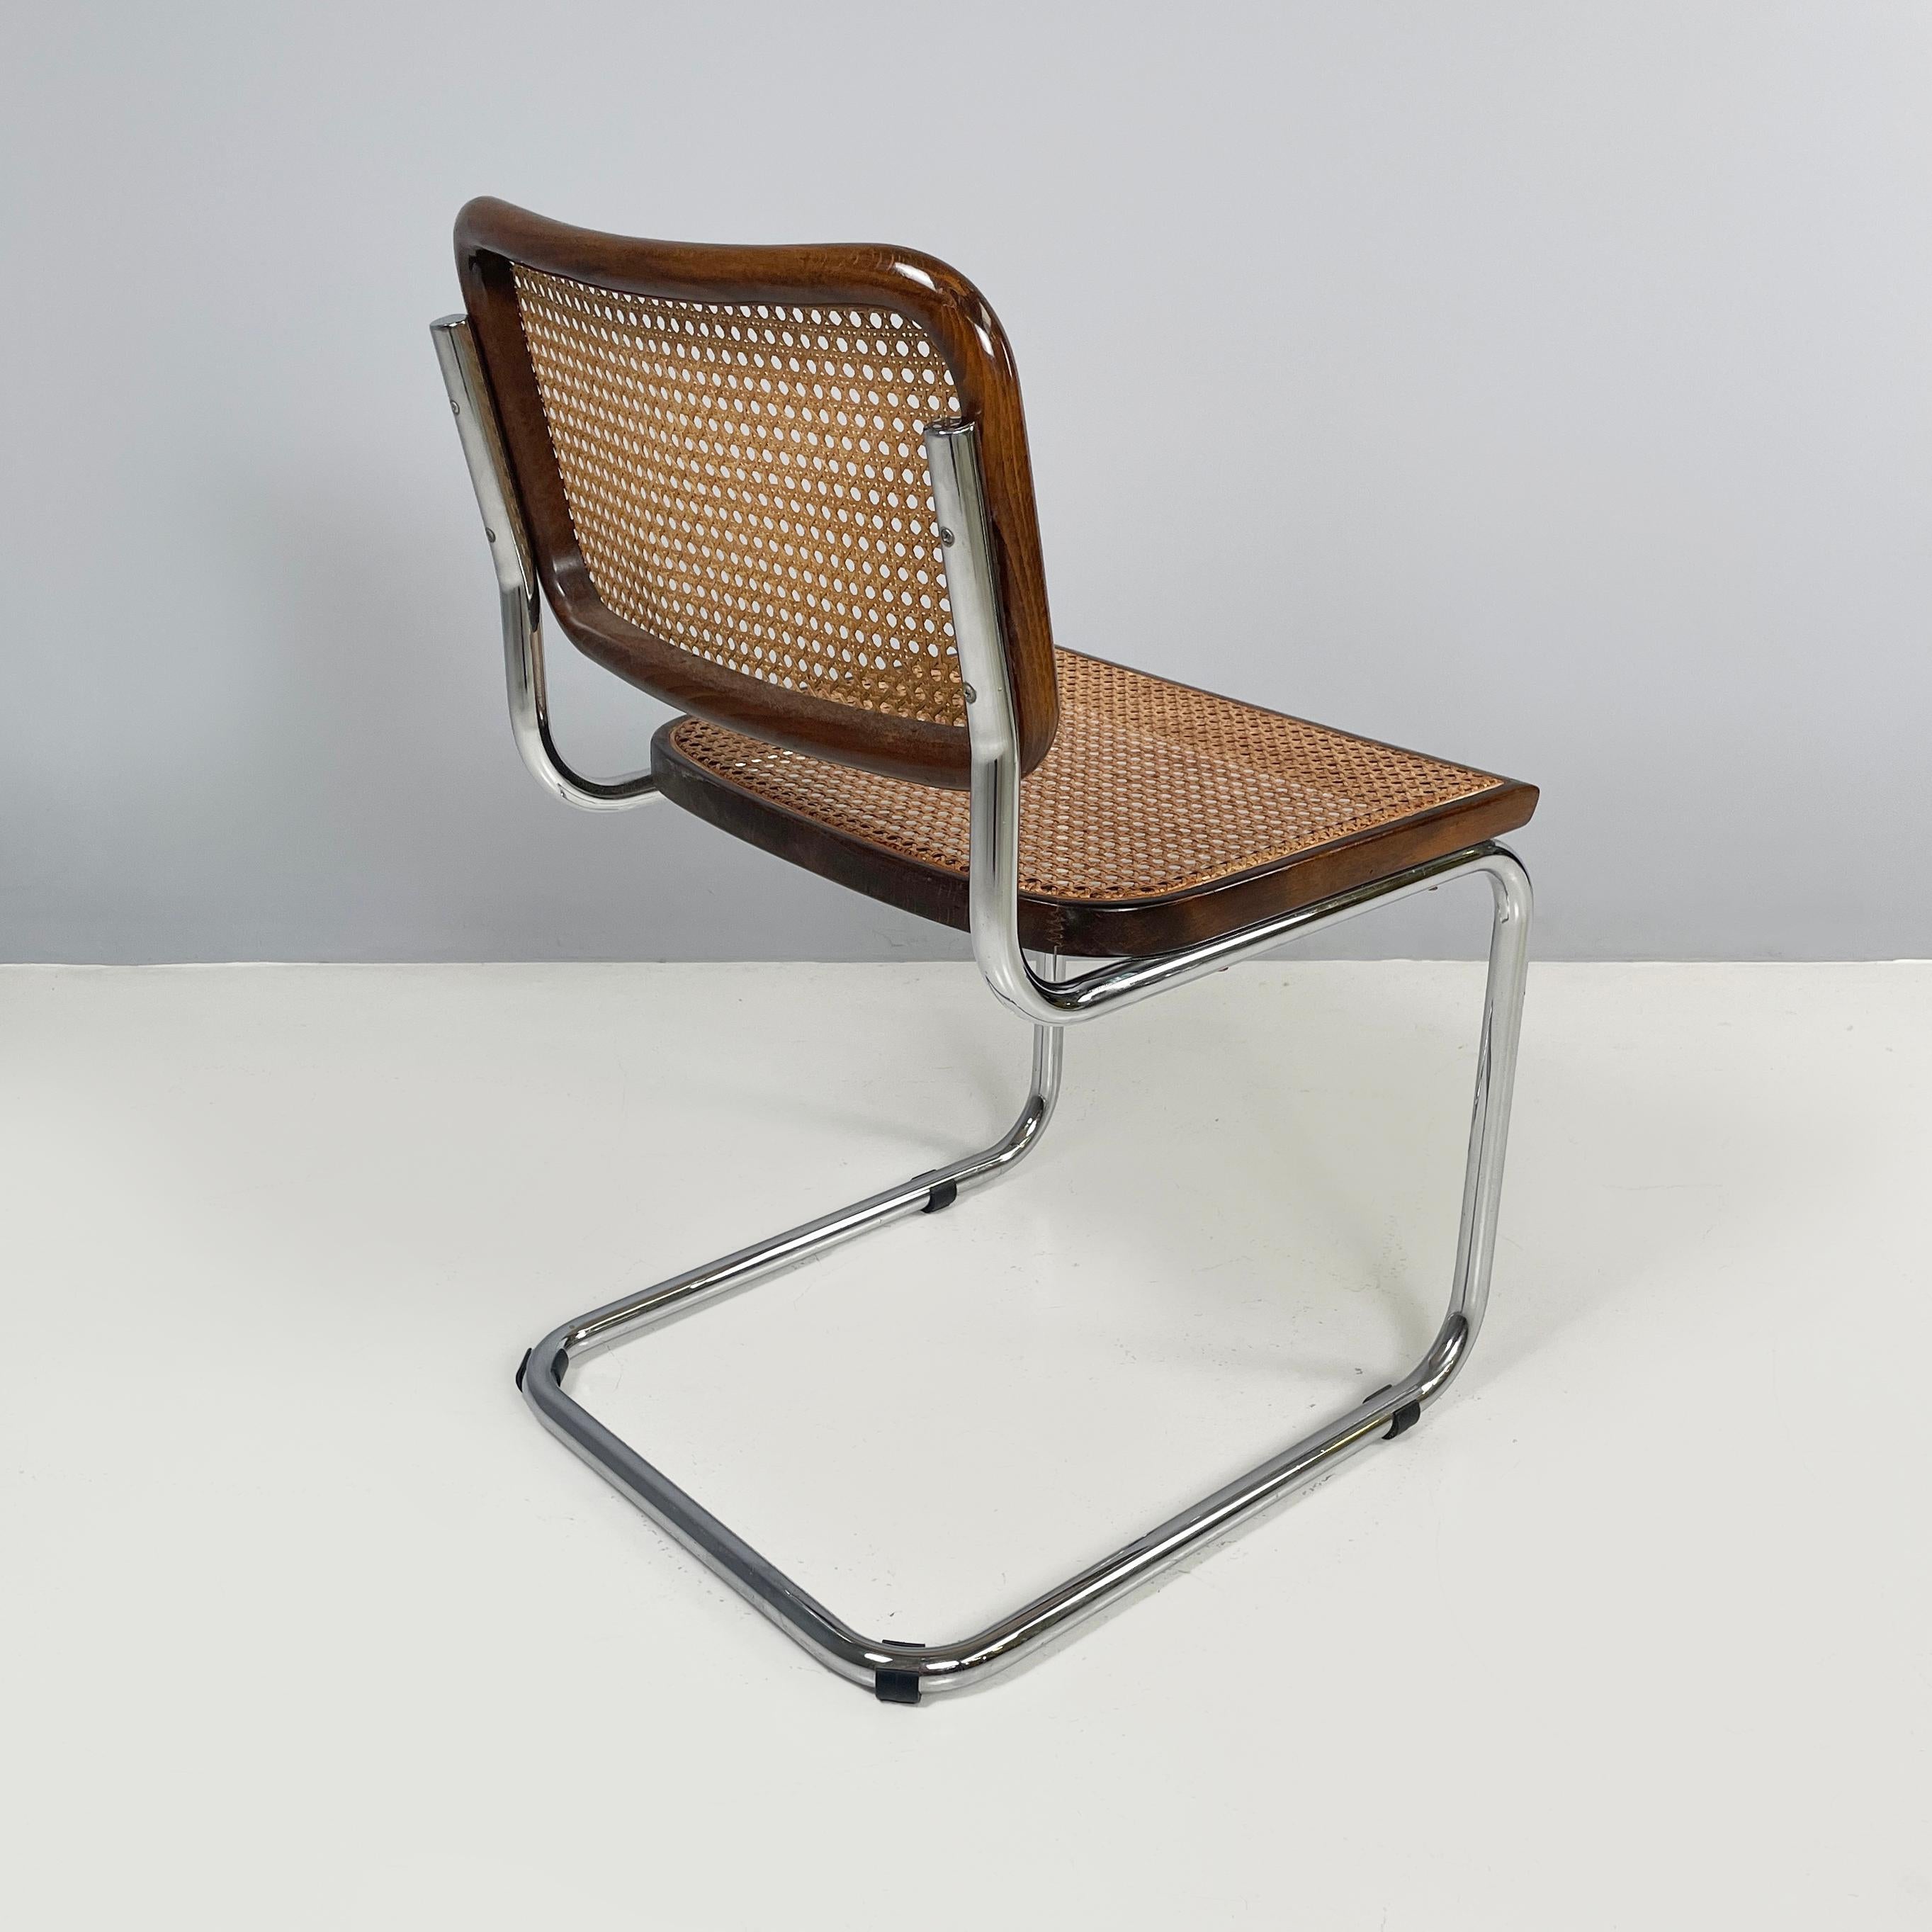 Italian mid-century modern Chair in straw, wood and steel, 1960s In Good Condition For Sale In MIlano, IT